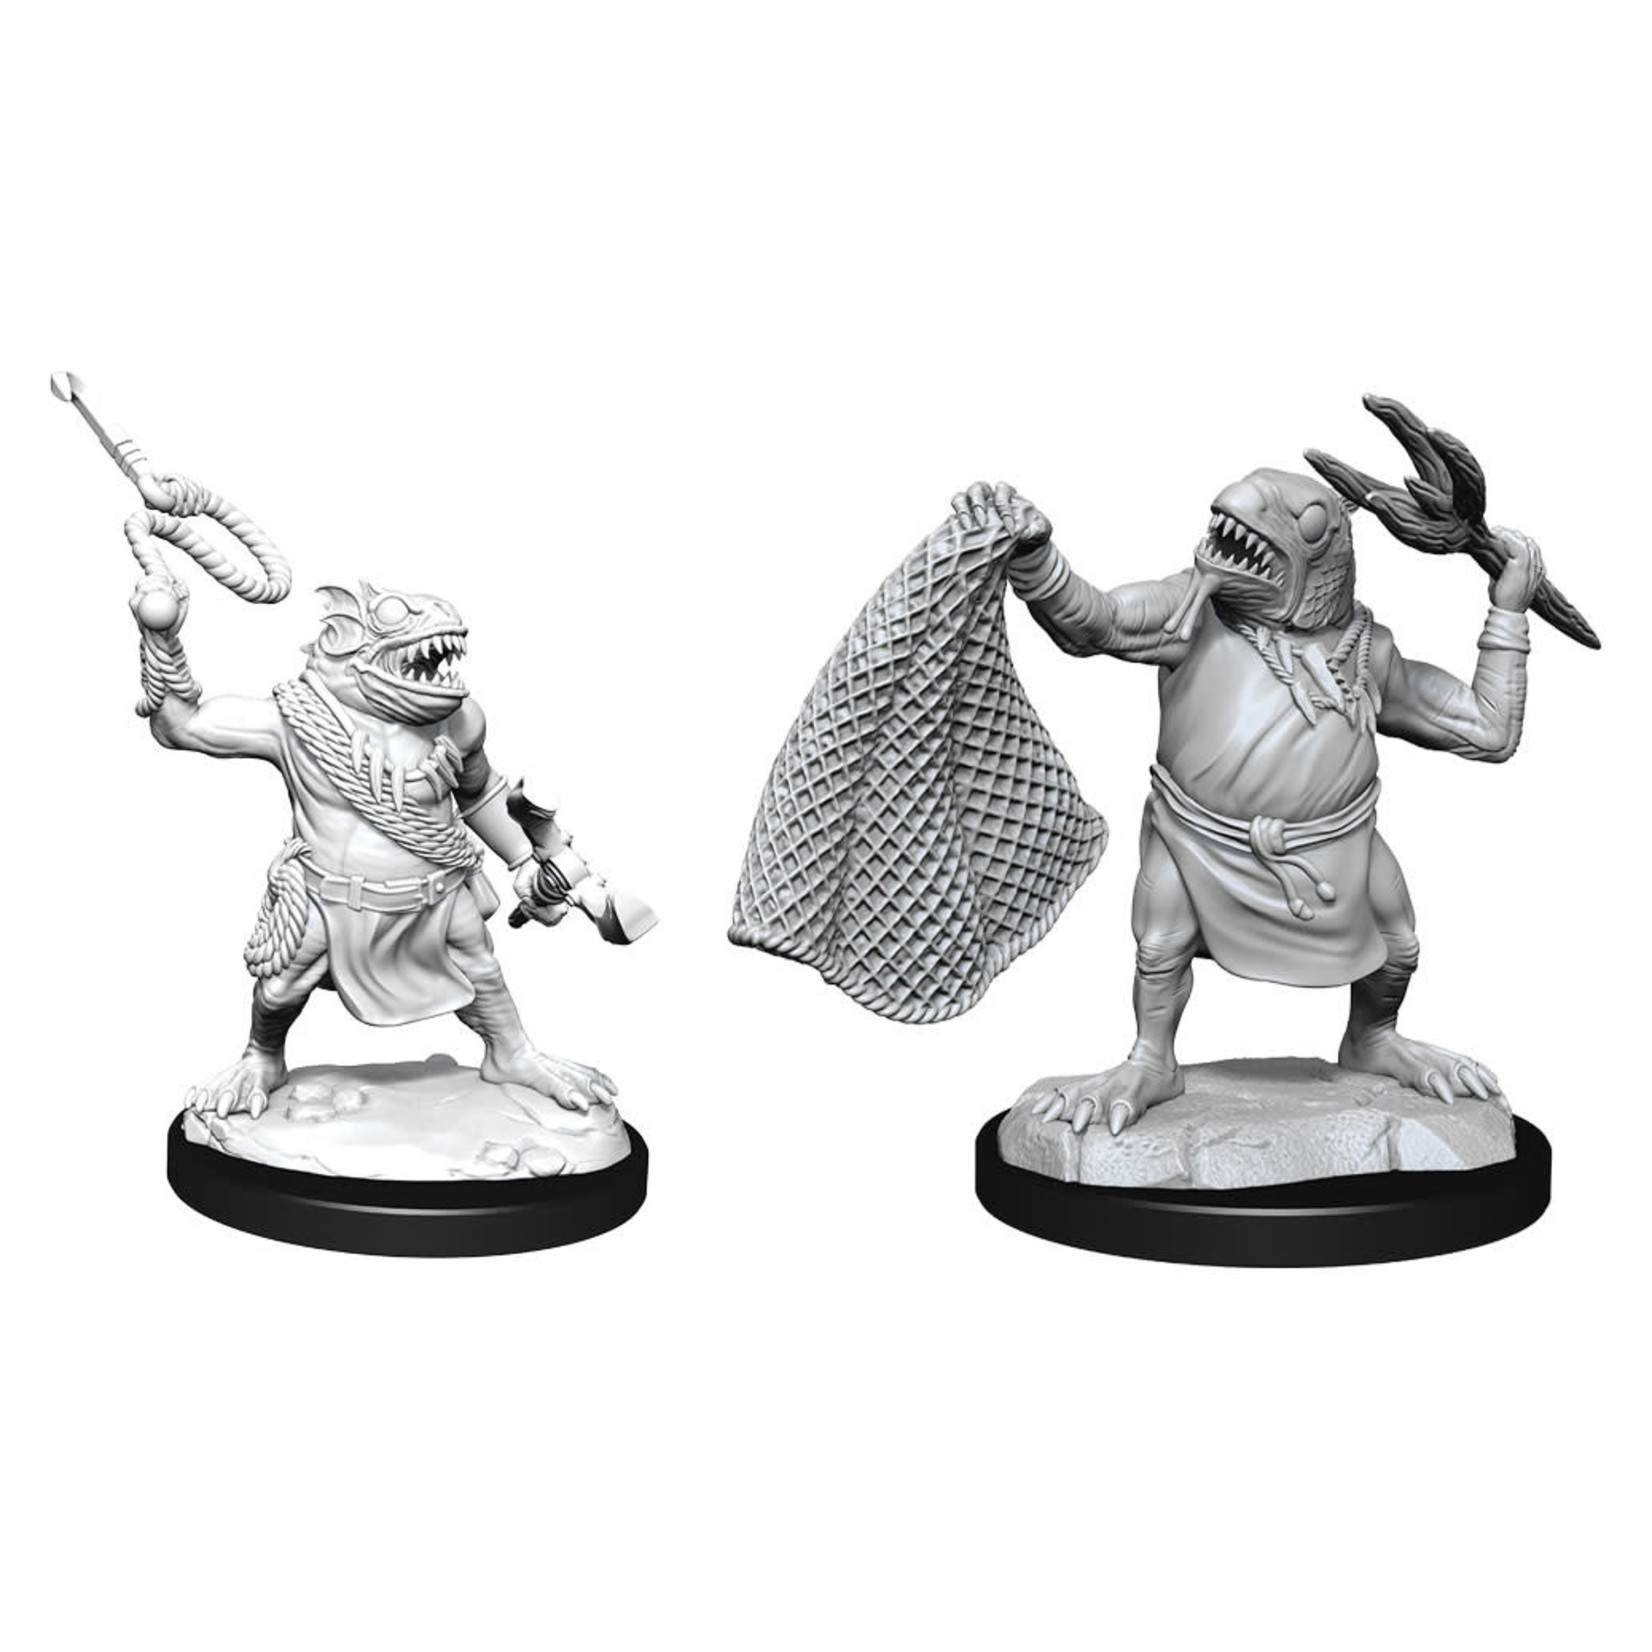 Wiz Kids Unpainted Miniatures: Kuo-Toa & Kuo-Toa Whip - D&D - W14